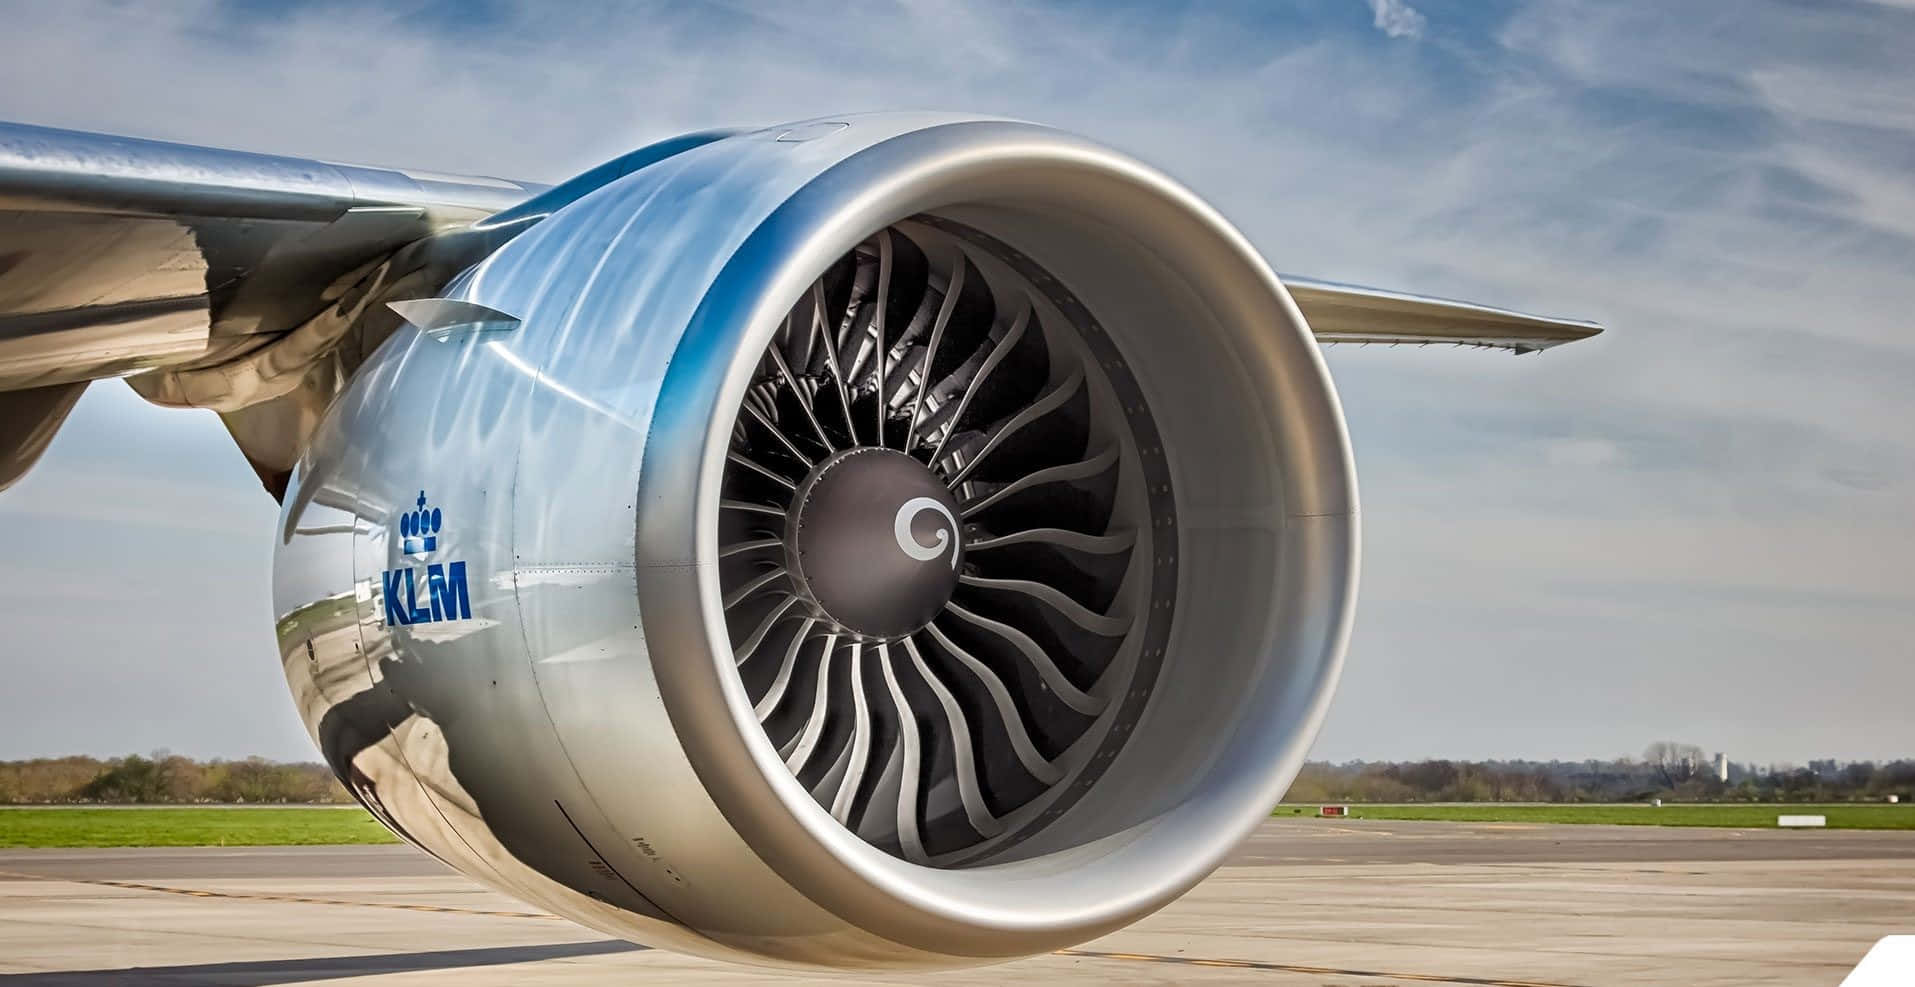 A Jet Engine Is Shown On The Tarmac